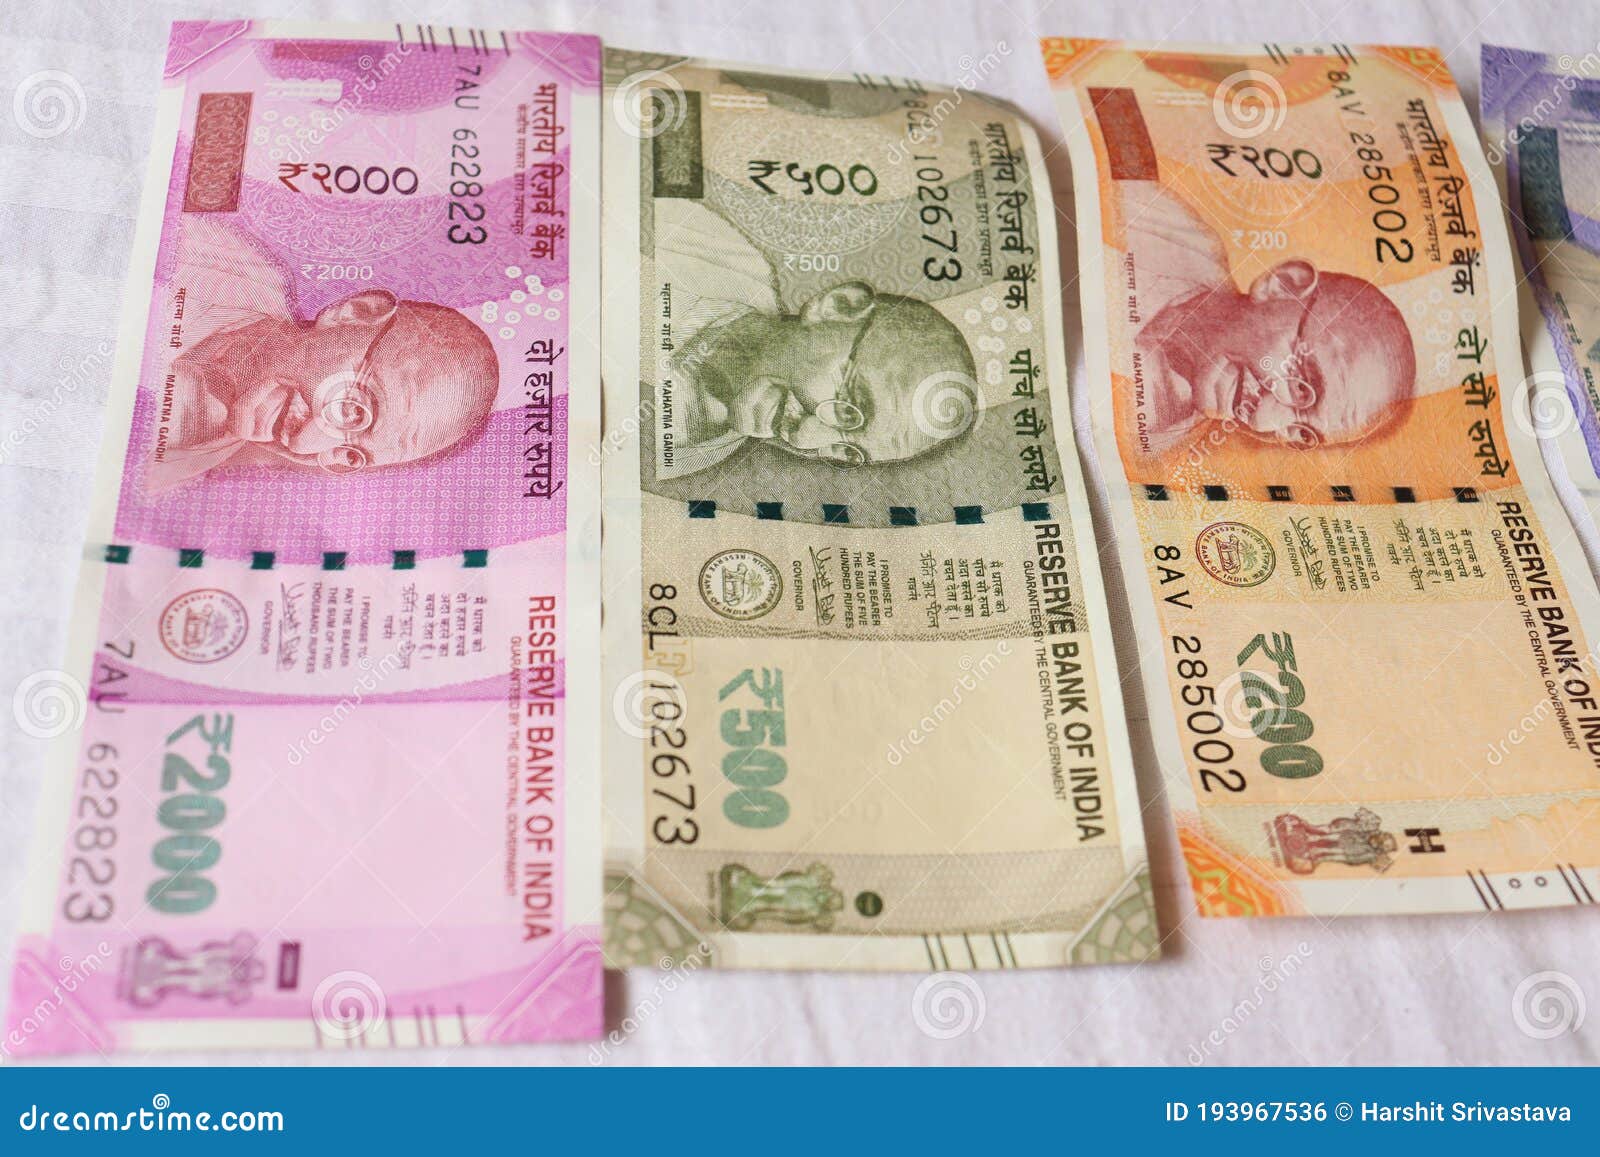 8756 Indian Currency Stock Photos HighRes Pictures and Images  Getty  Images